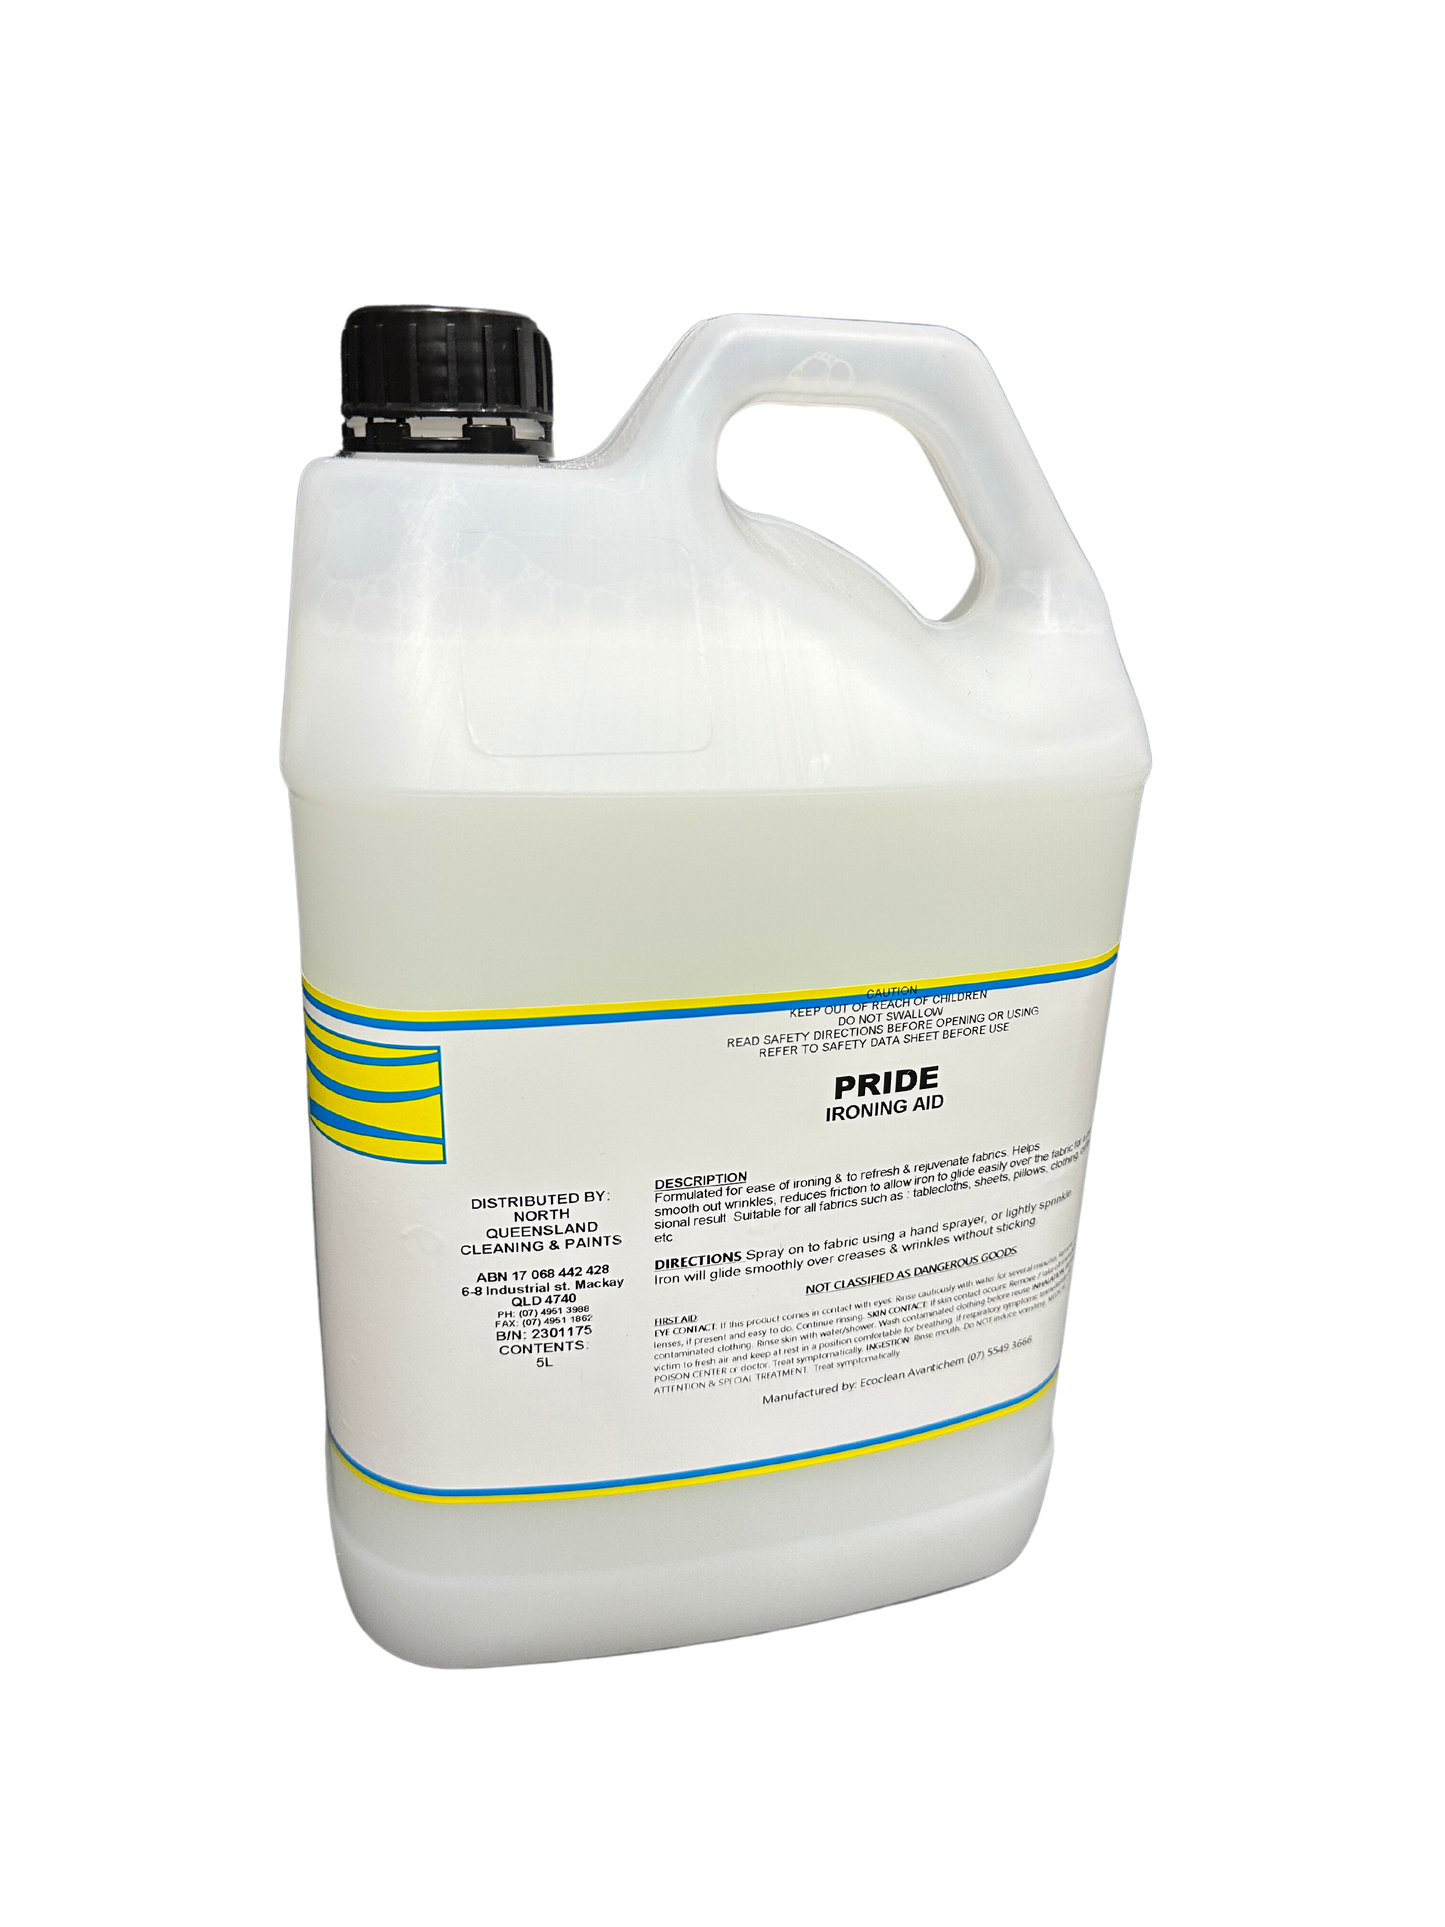 Pride is our ironing-aid formular designed to provide a crisp new look to all cottons, synthetics etc. With inbuilt lubricants to allow the soleplate to glide effortlessly over the heaviest ironing. NOTE: Biodegradable and Septic Safe. Mackay